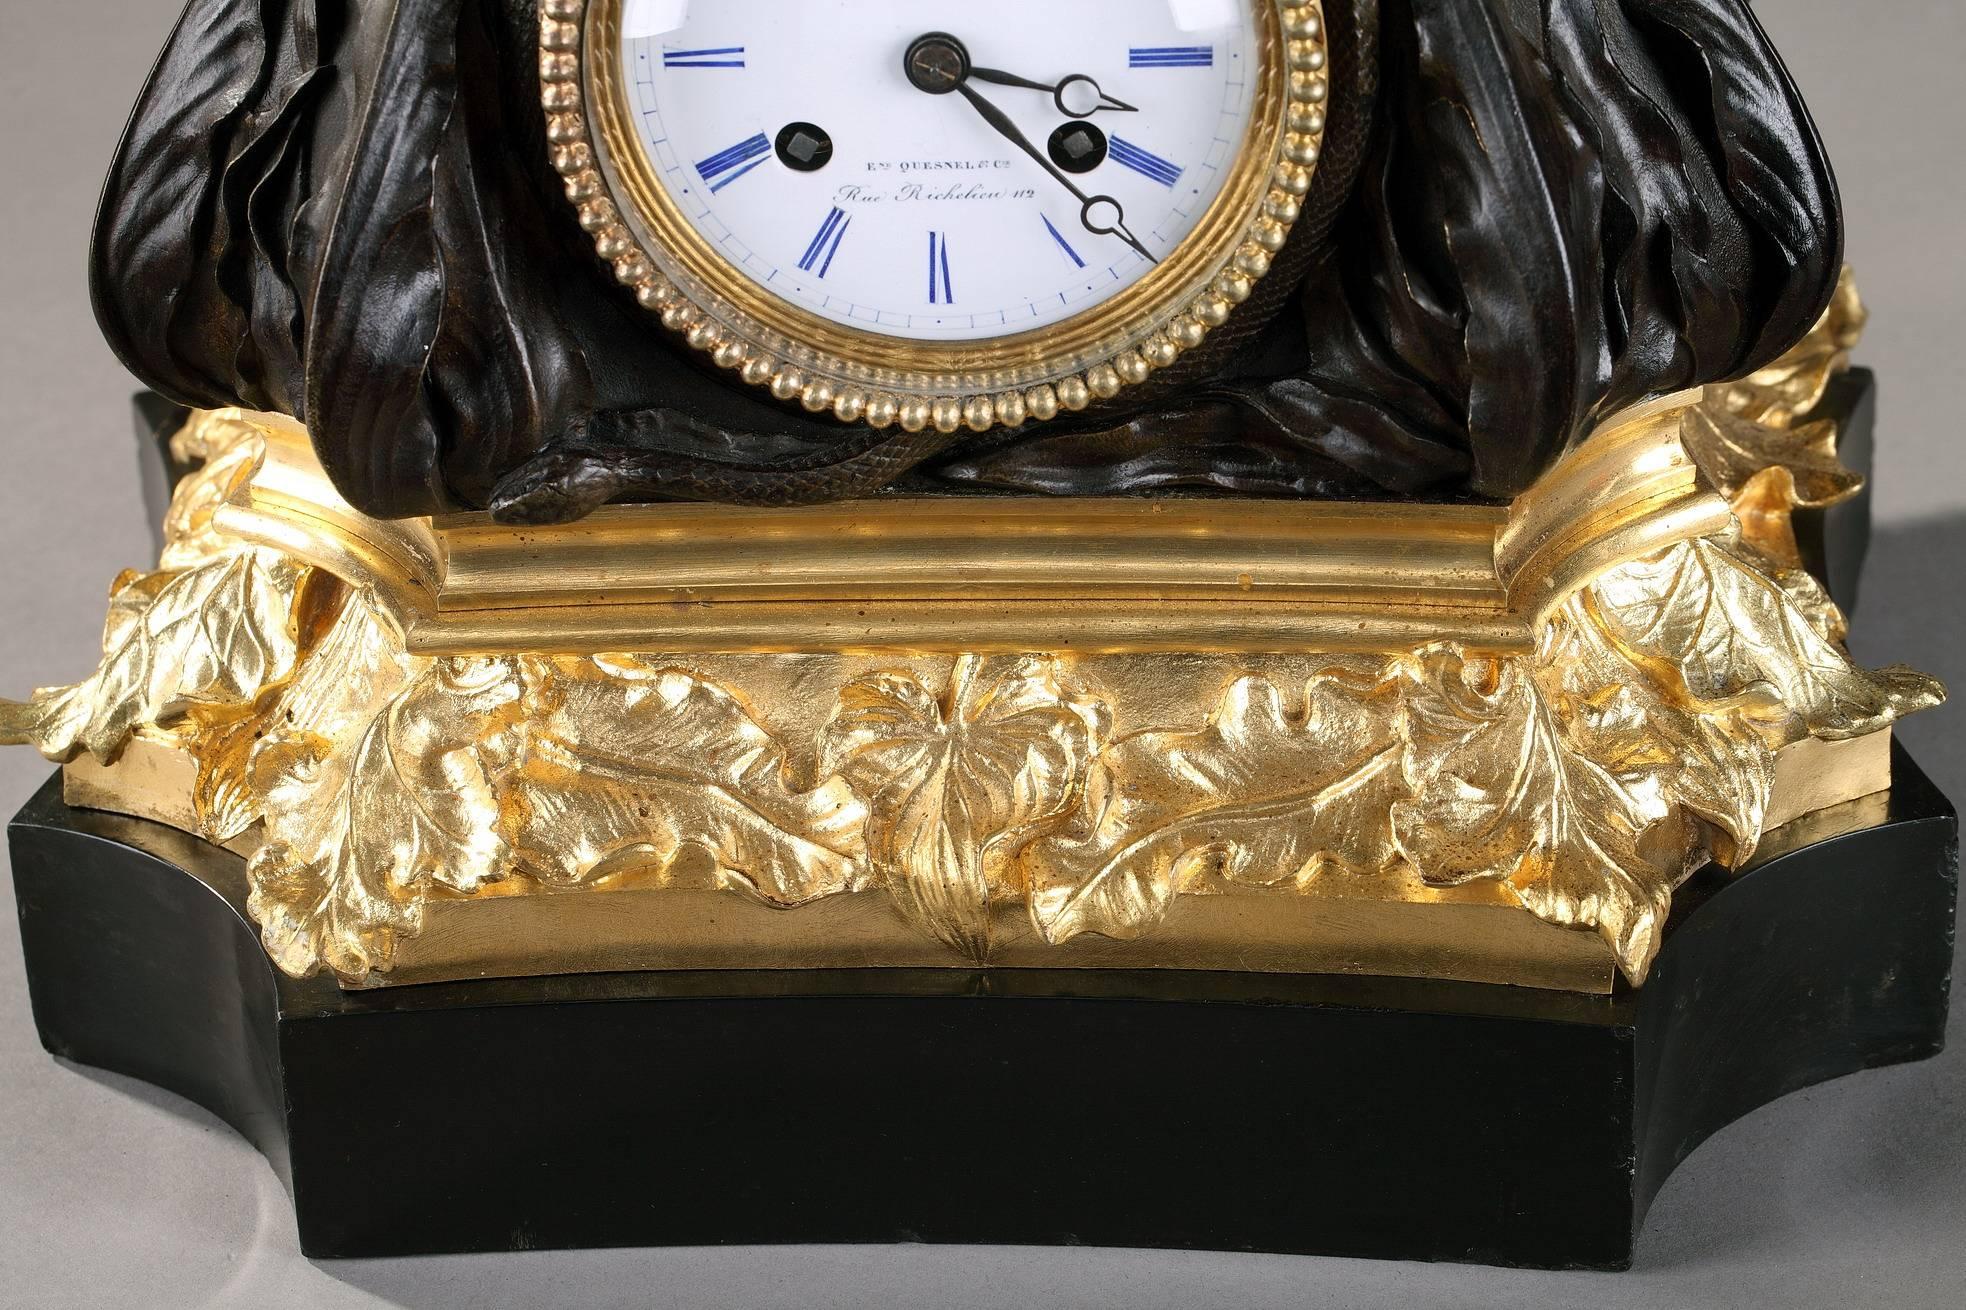 Mid-19th century mantel clock in gilt and patinated bronze featuring a winged cupid on a terrace sculpted with flowers, foliages and animals. The white enamelled dial, with blue Roman numerals for hours, is highlighted with a frieze of ormolu pearls